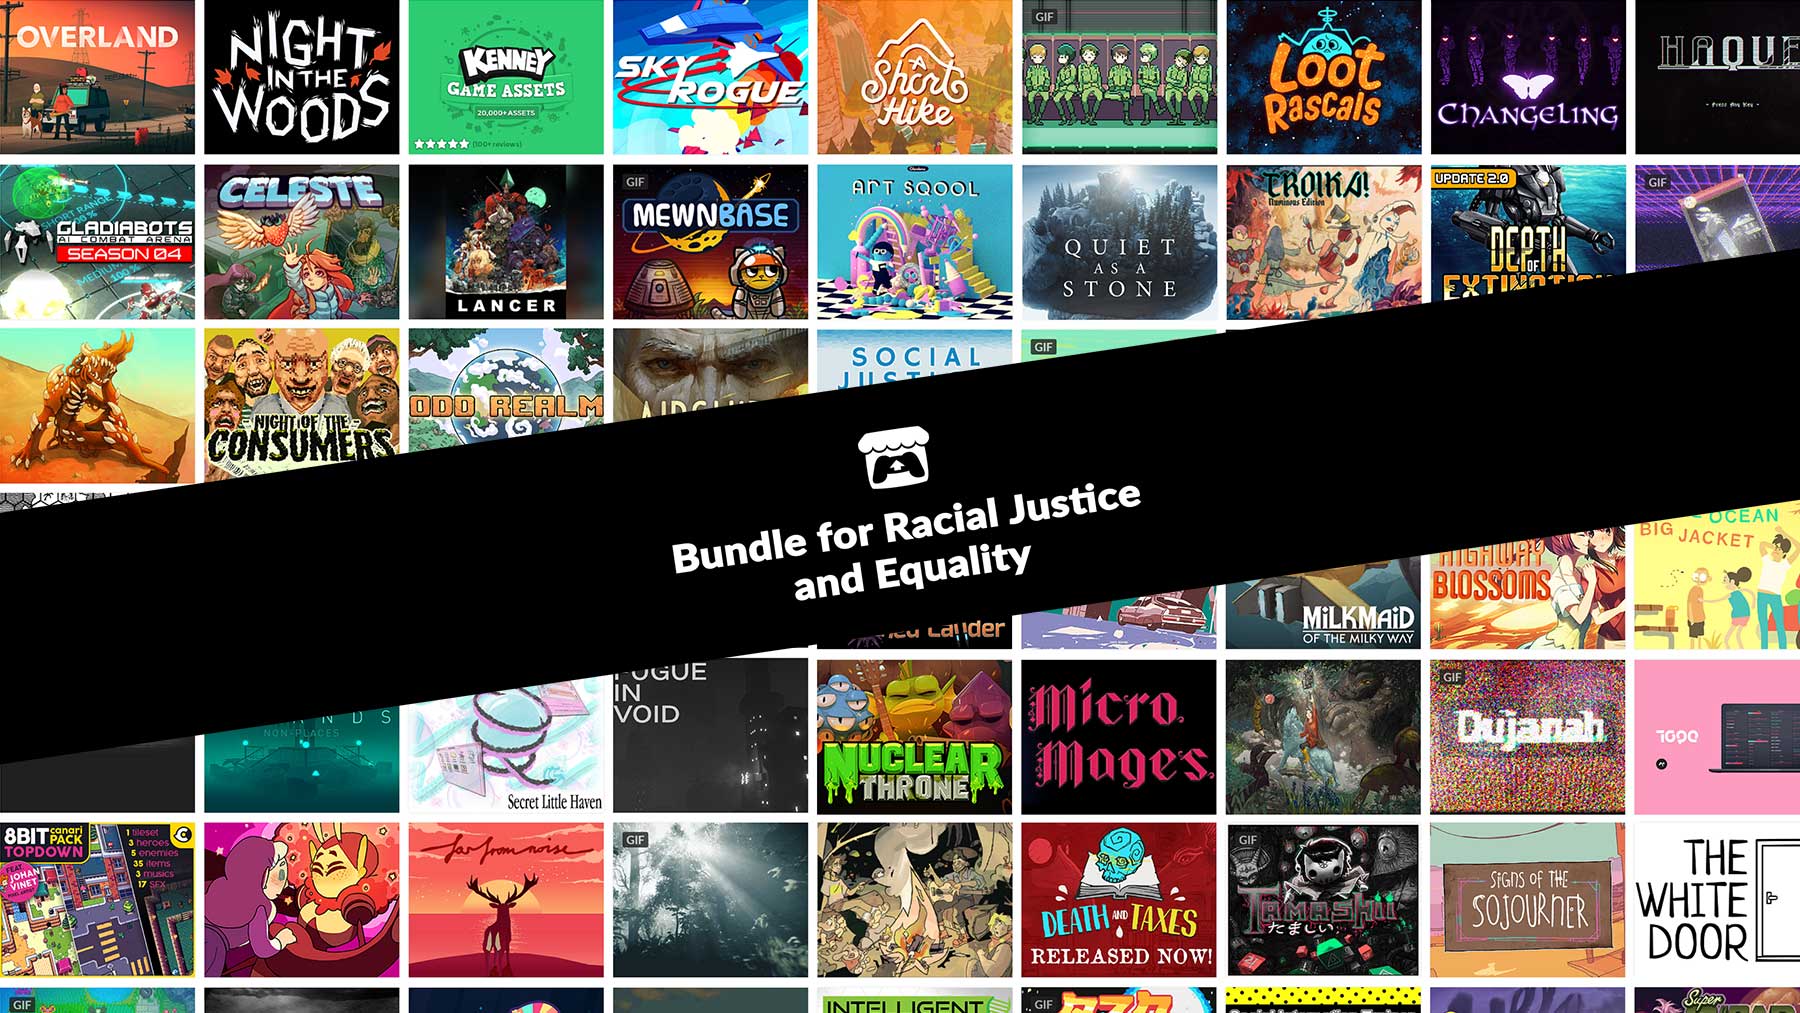 itch.io "Bundle for Racial Justice and Equality" bundle-for-racial-justice 